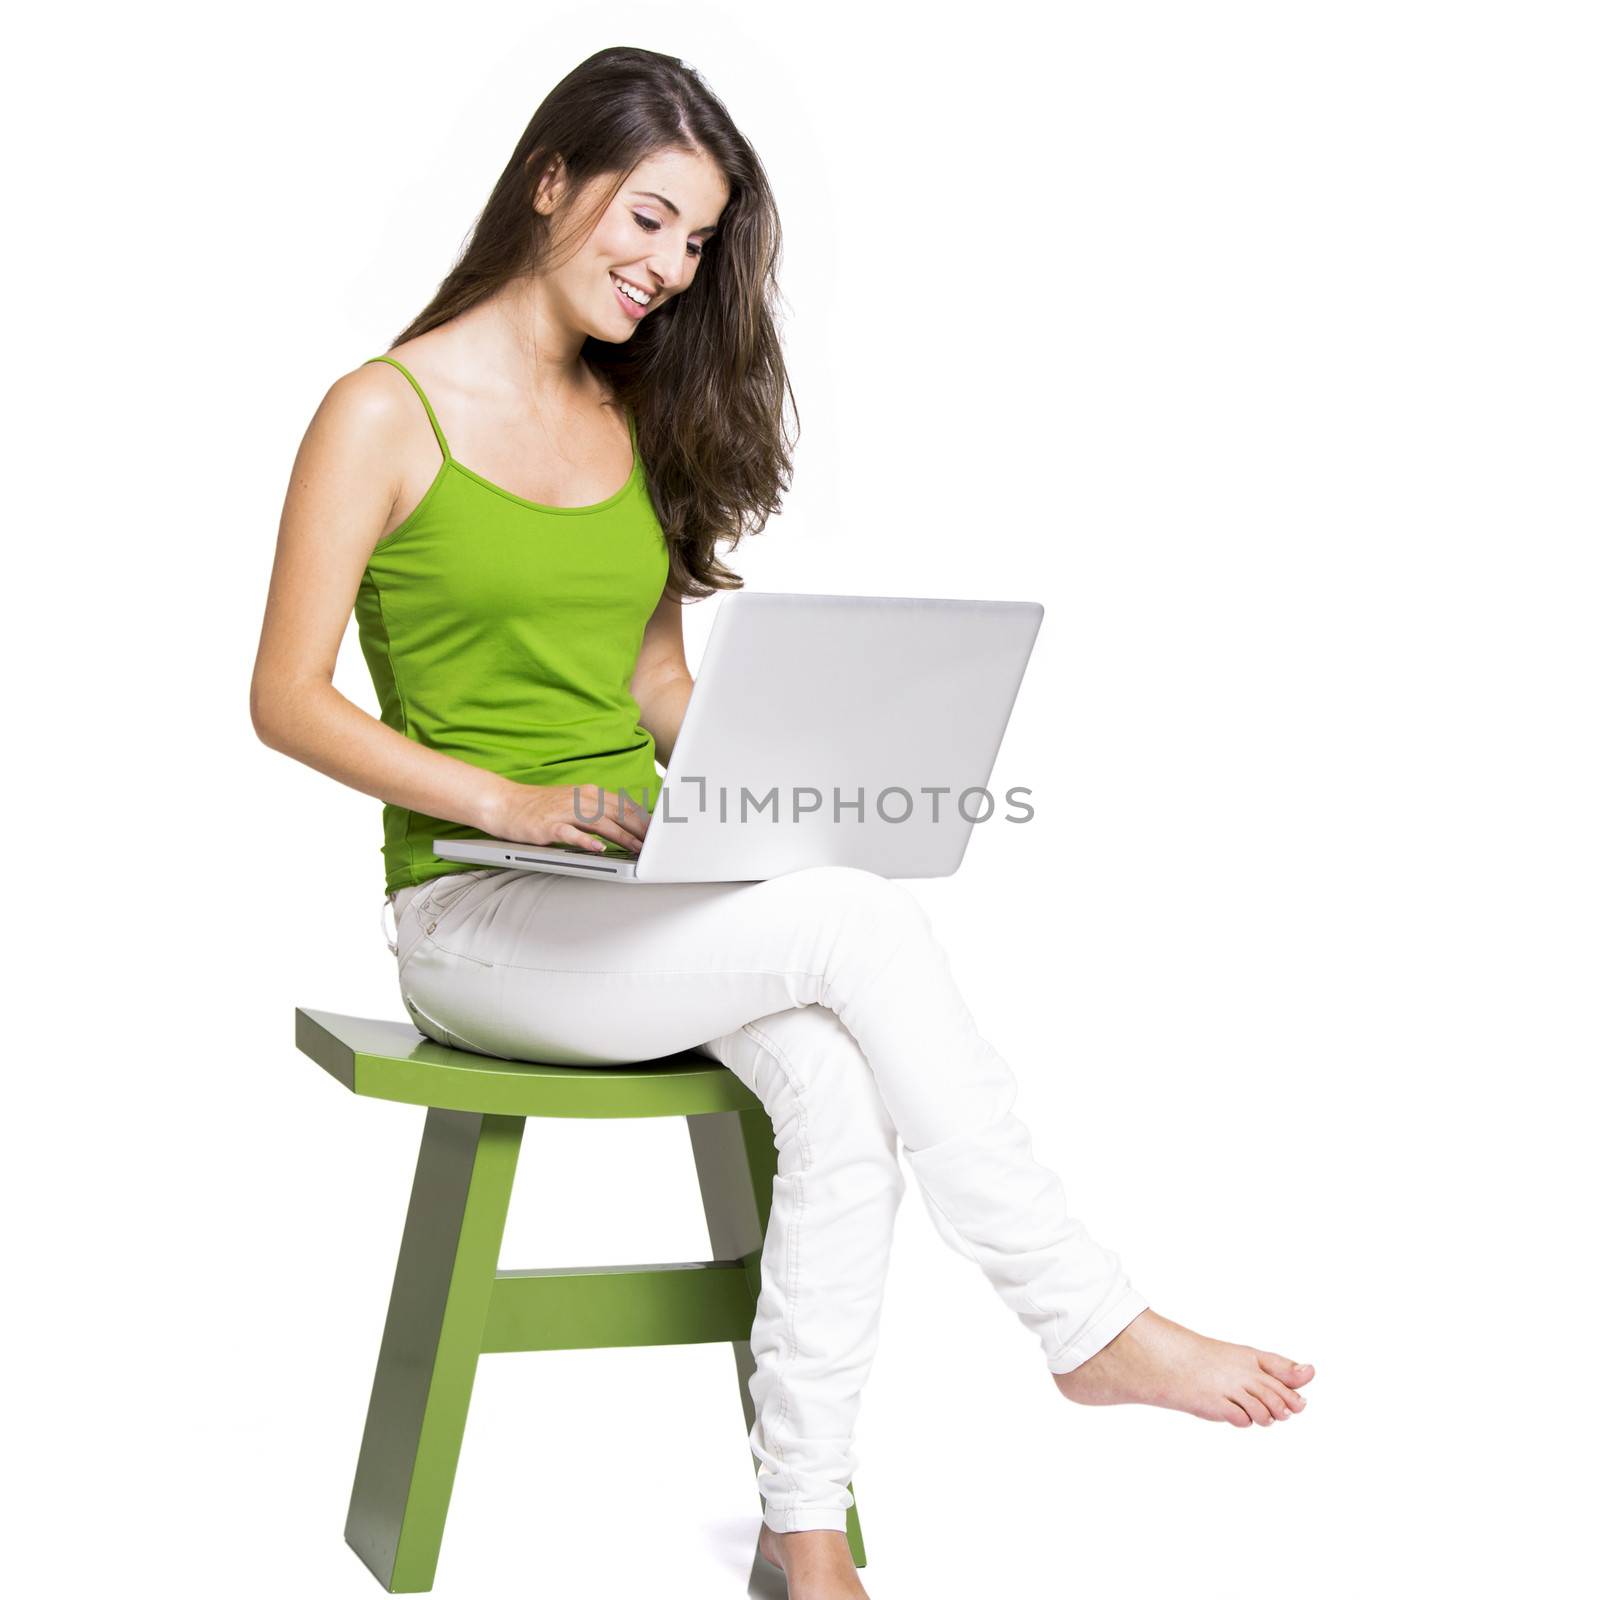 Beautiful woman sitting in a chair working with a laptop, isolated over a white